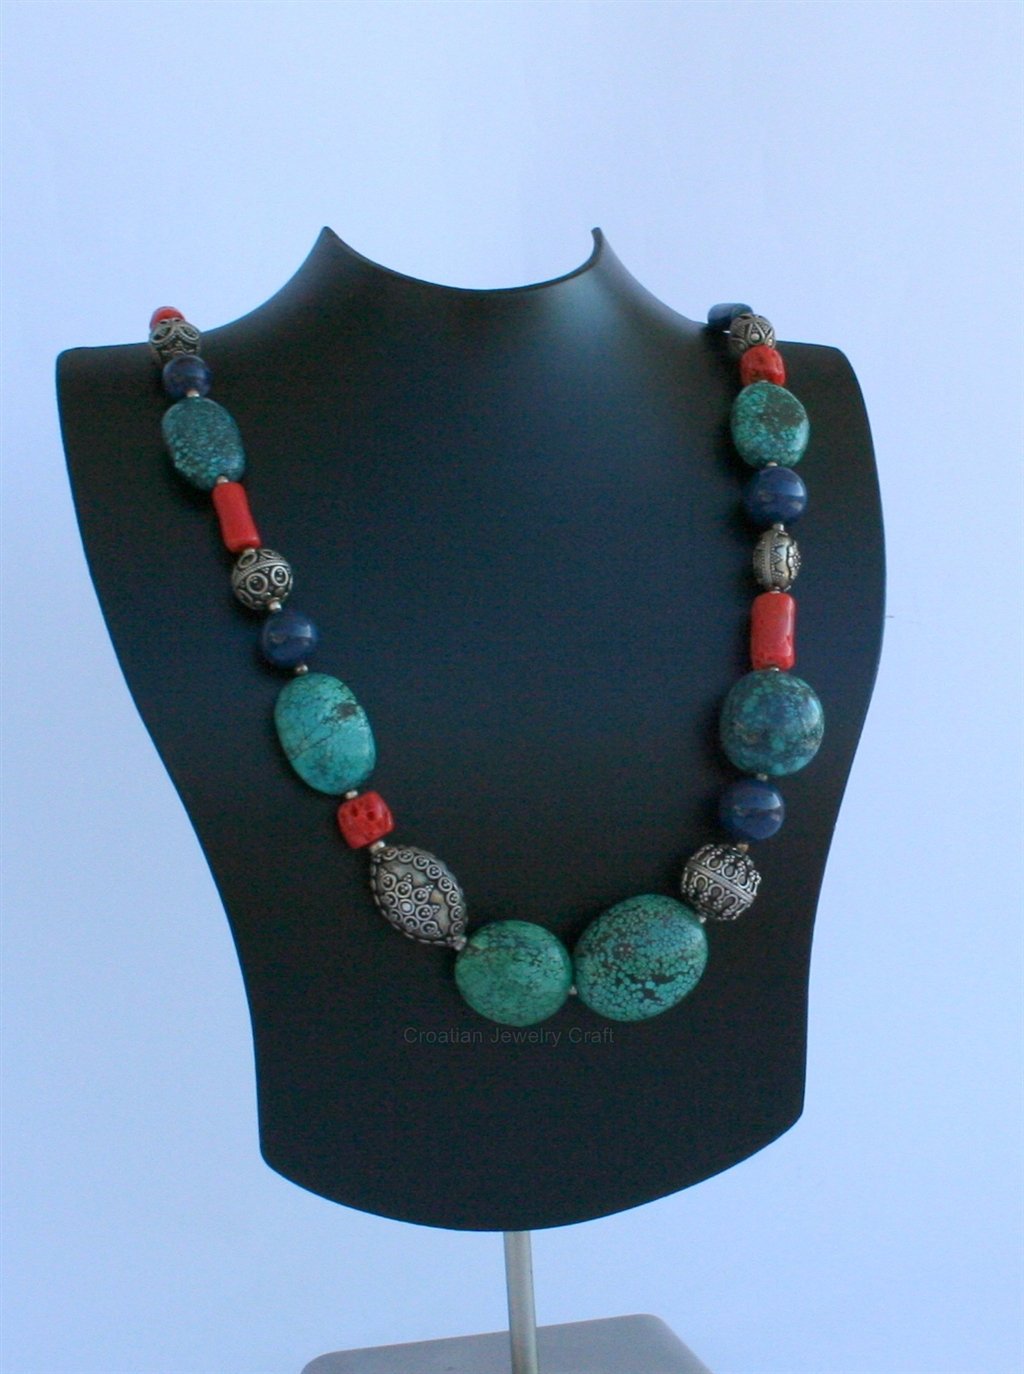 BIG BEAD ROUND RED NECKLACE - J. McVeigh Jewelry